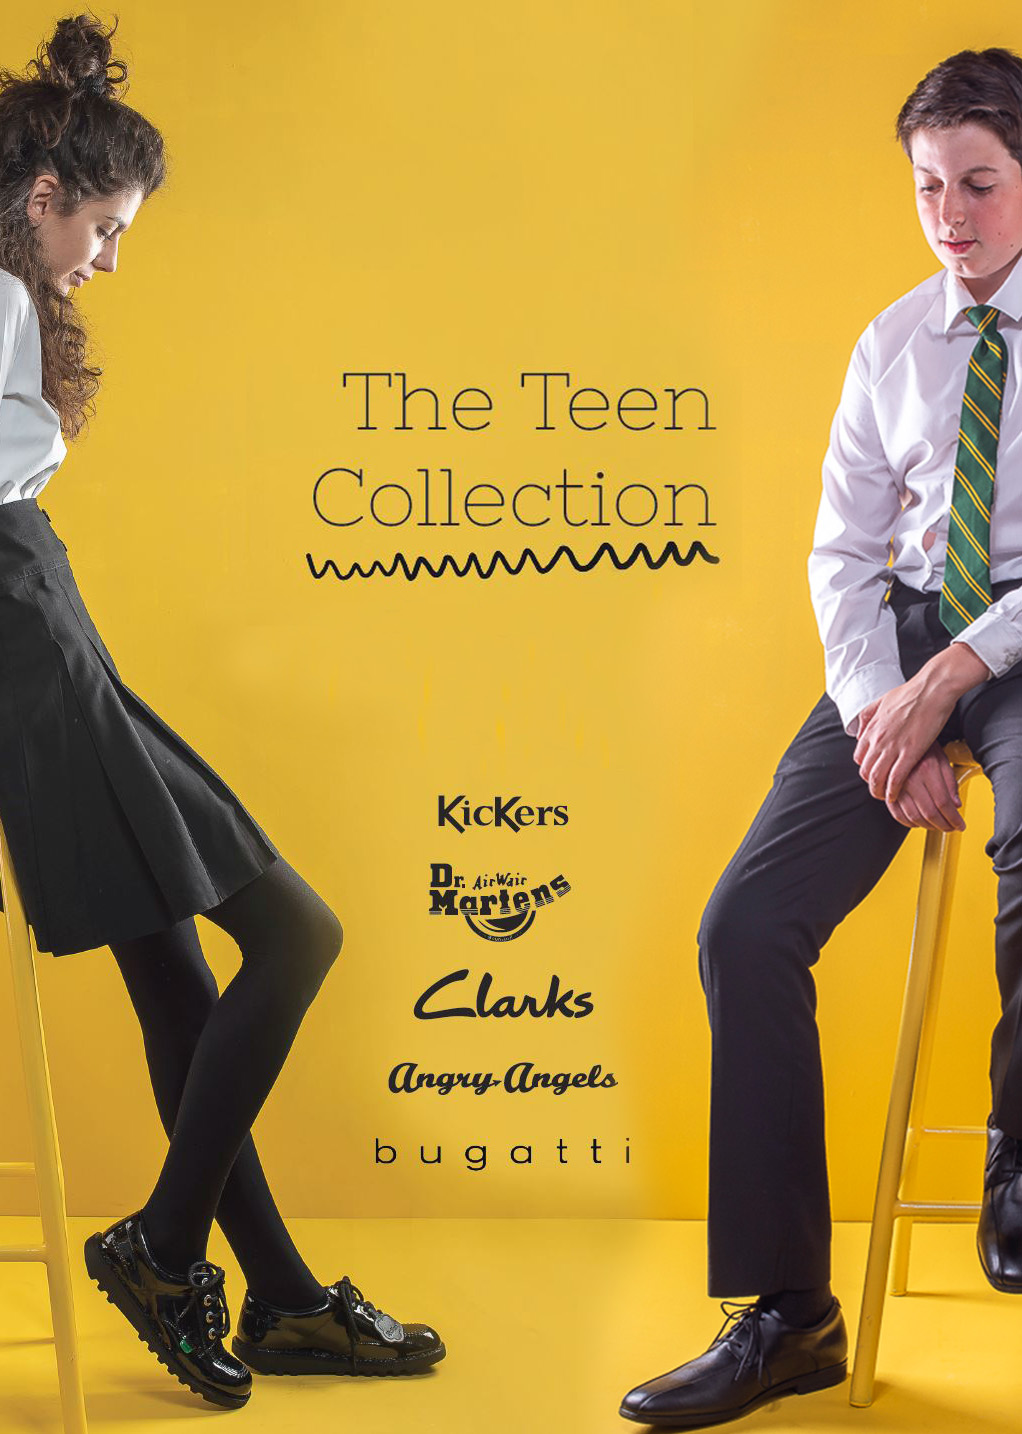 The Teen Collection